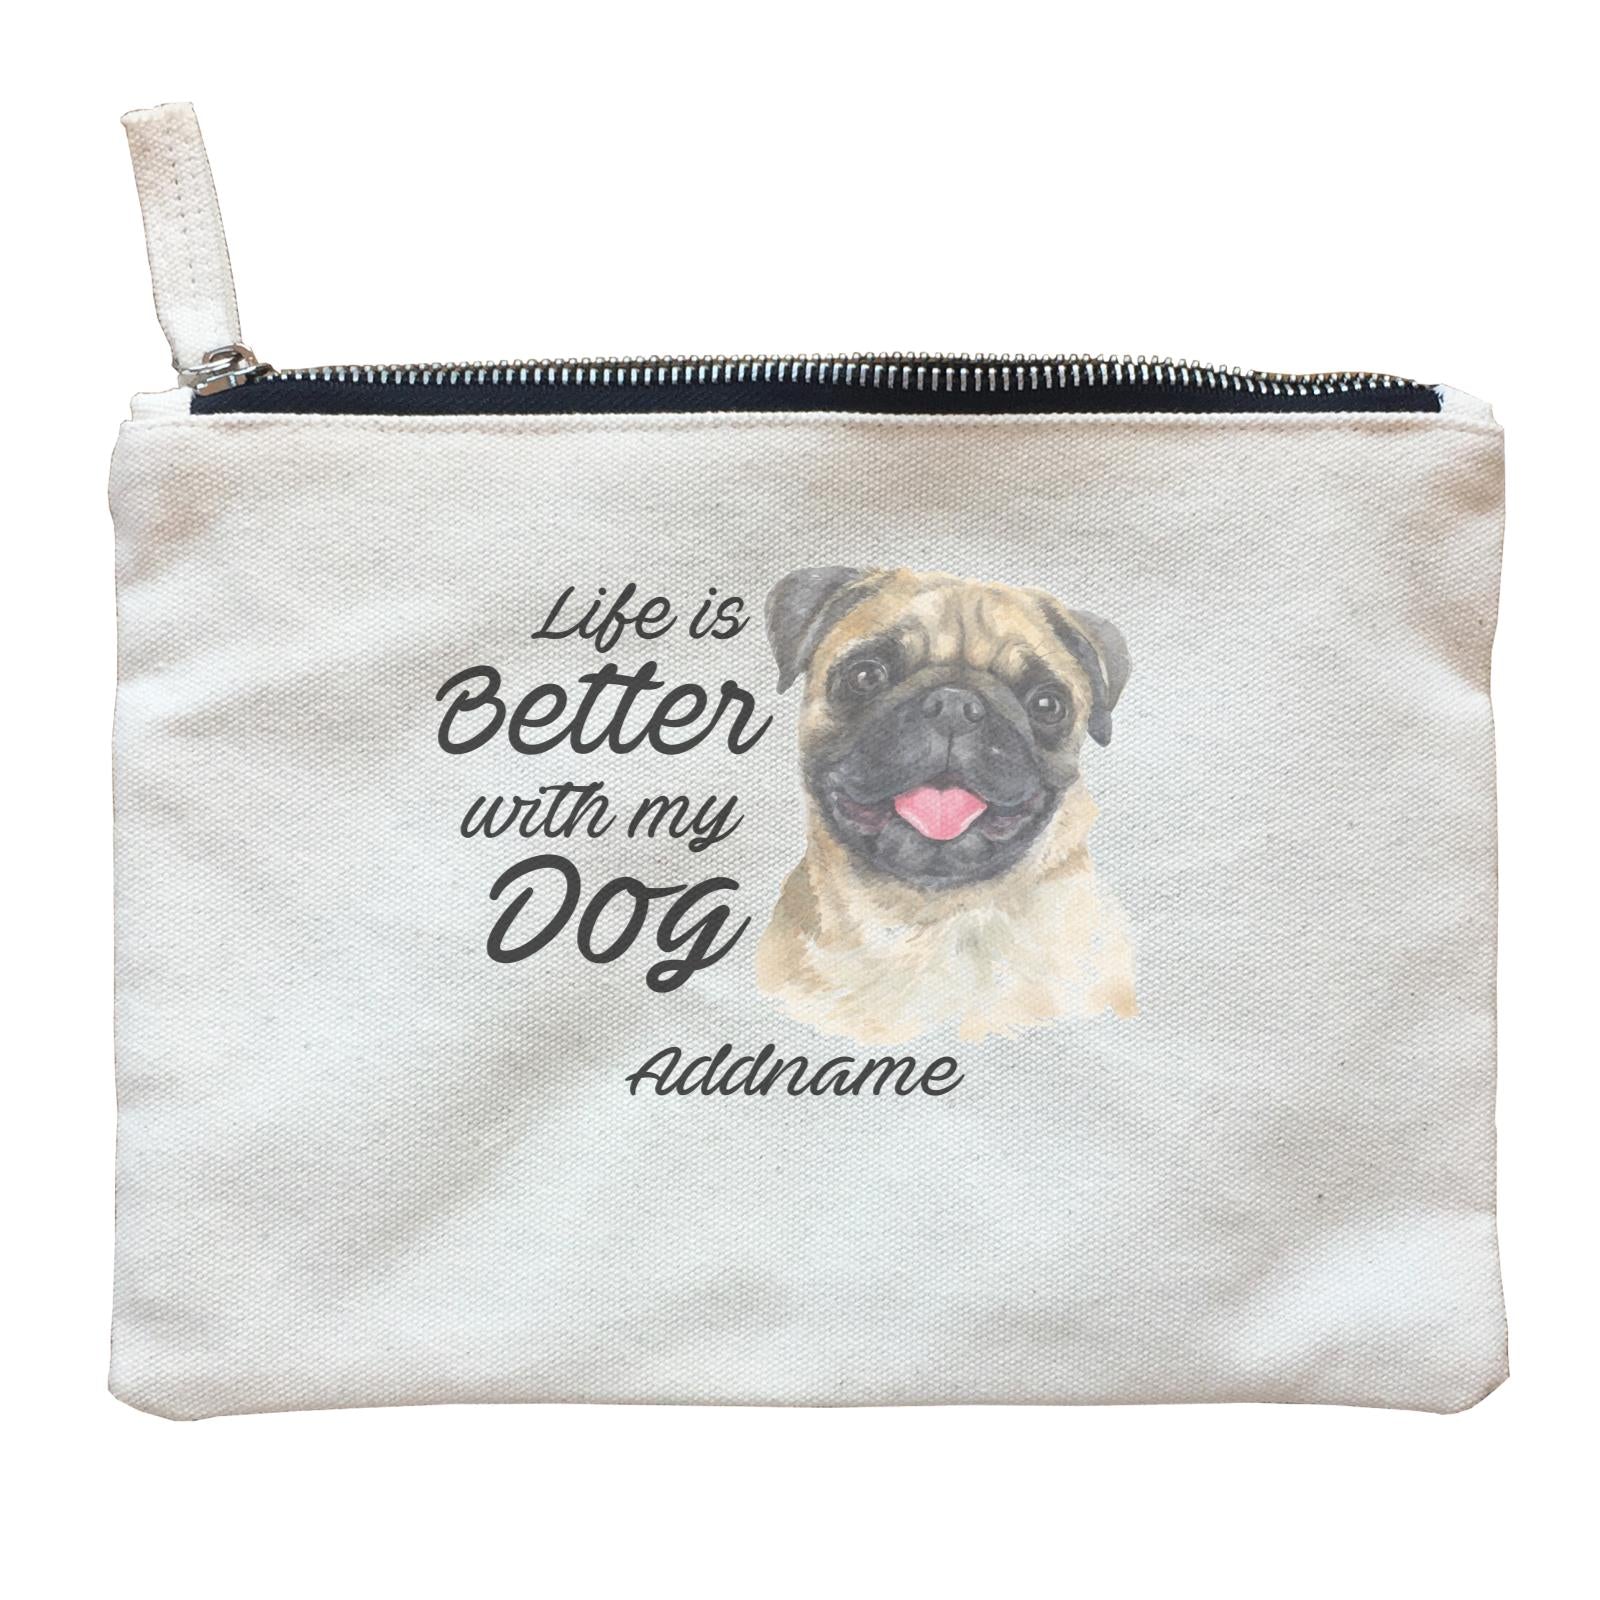 Watercolor Life is Better With My Dog Pug Addname Zipper Pouch